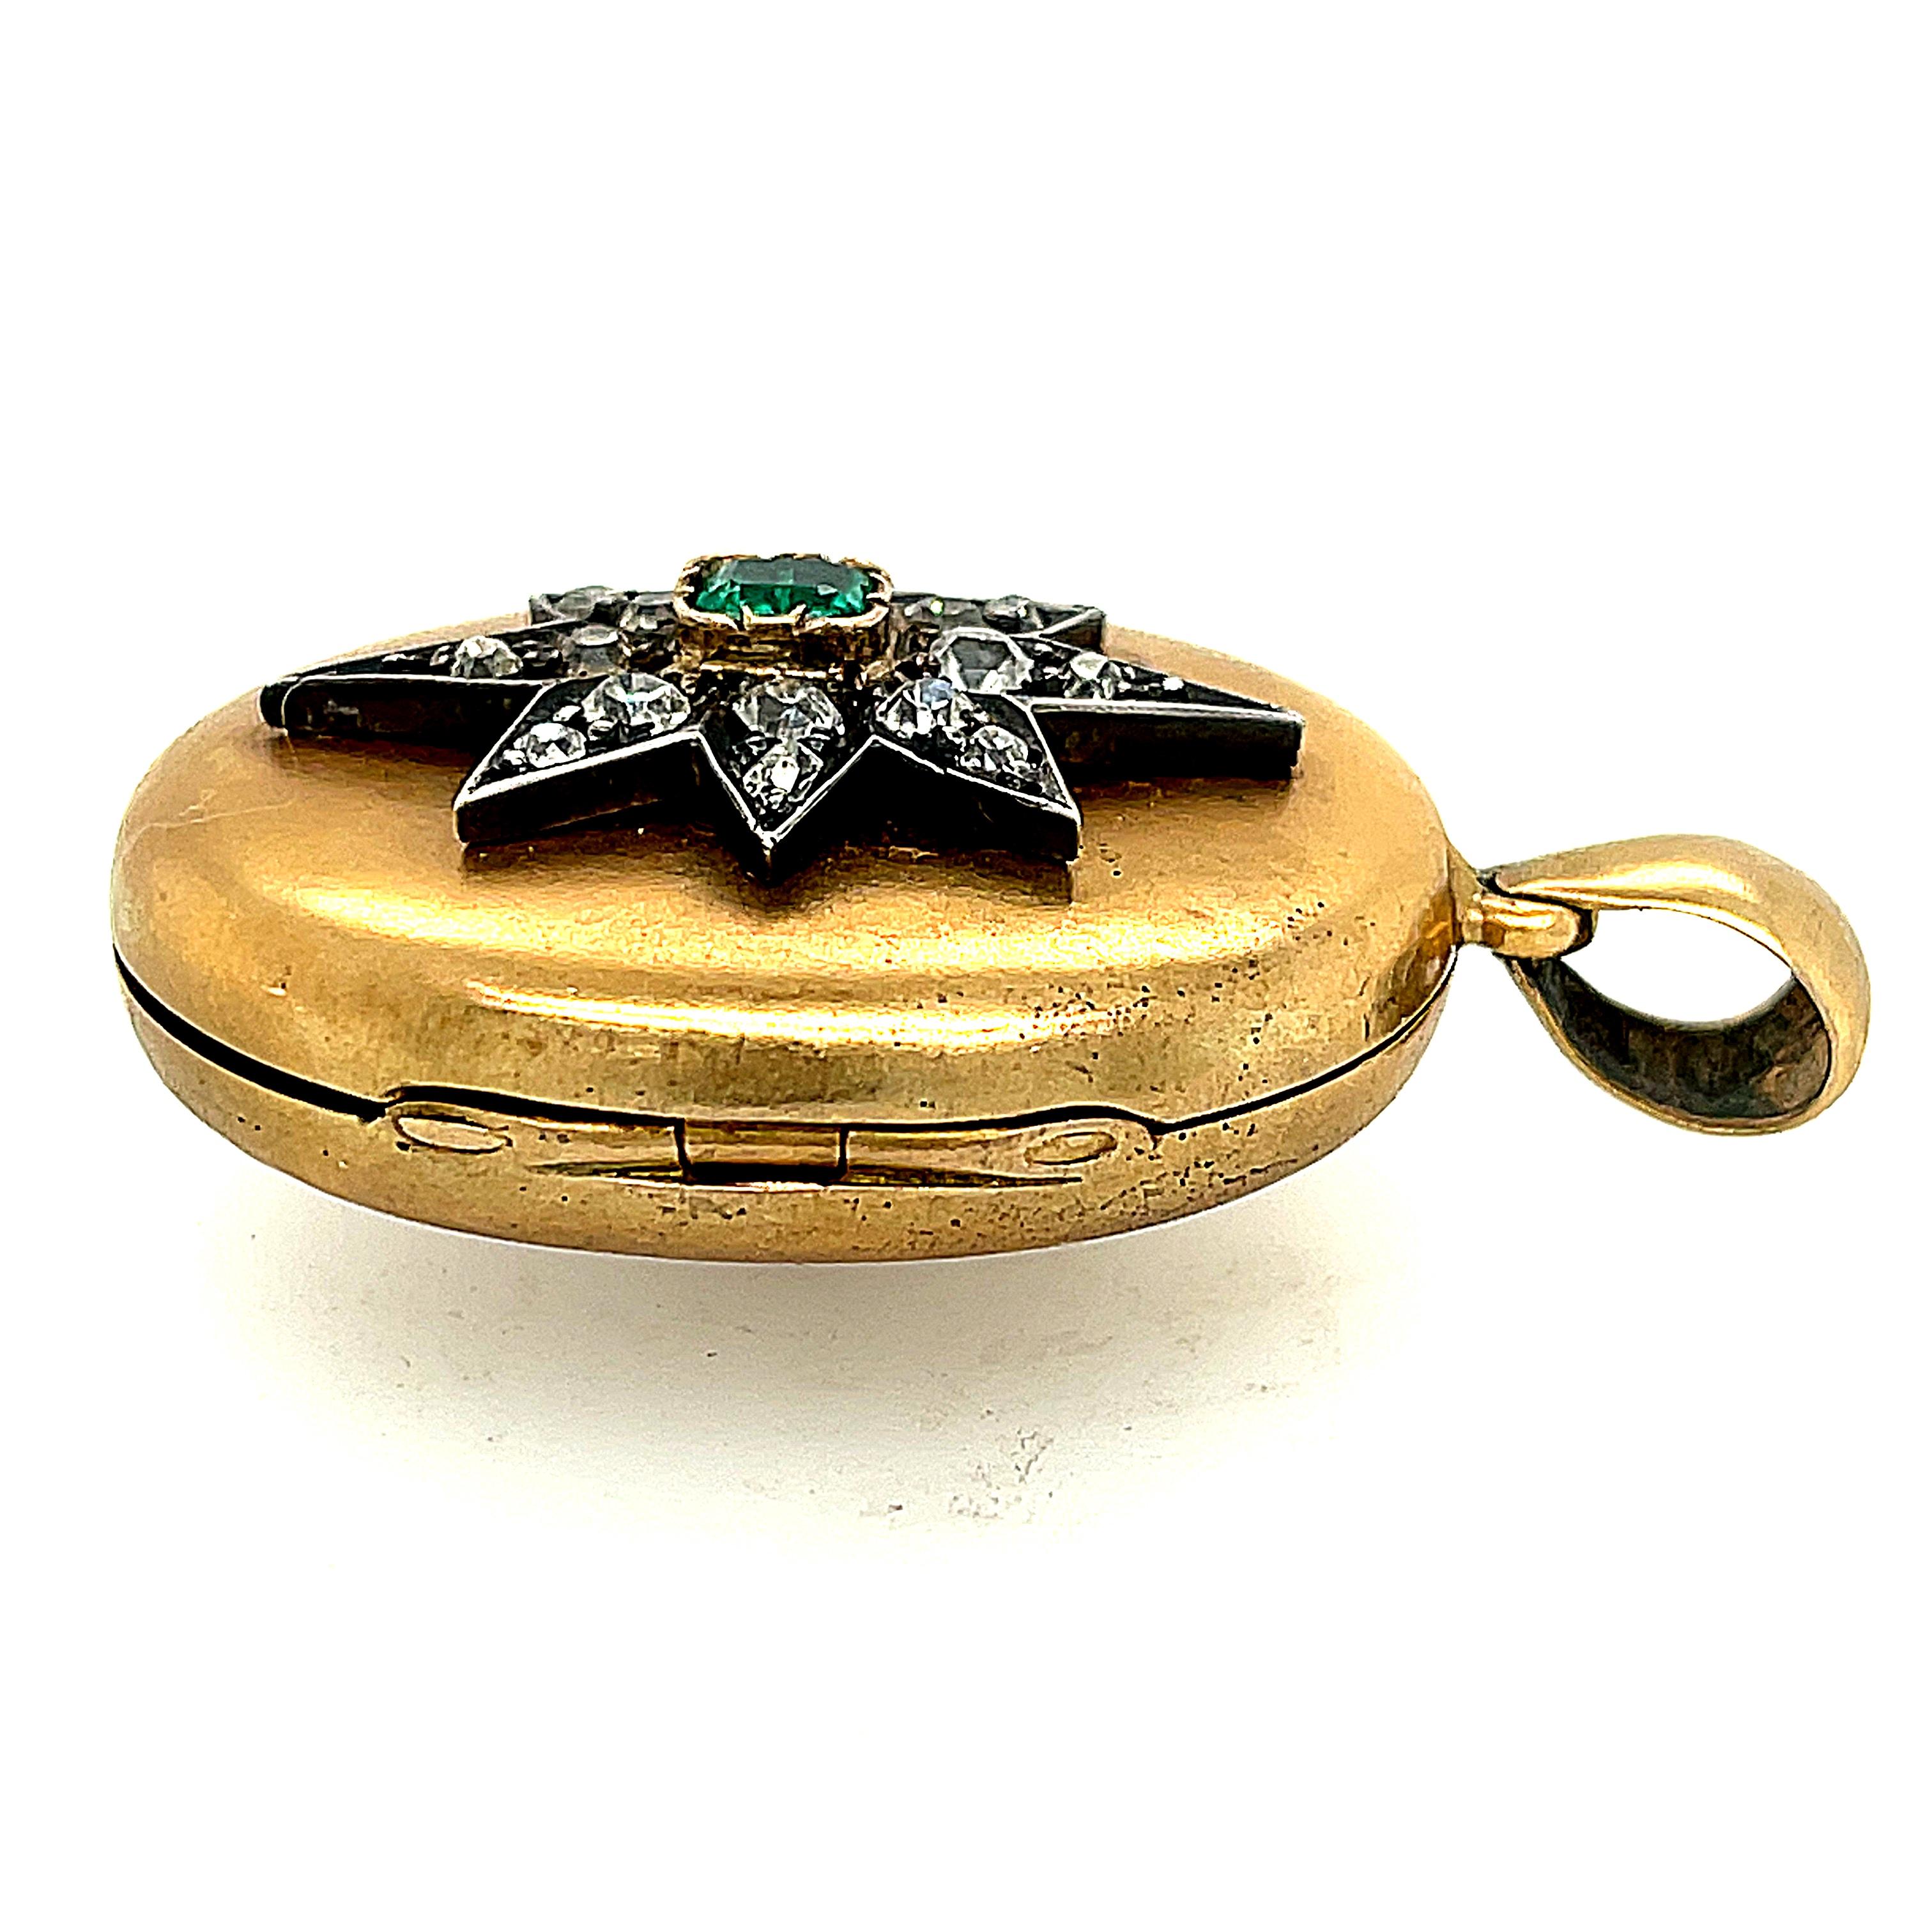 Rare double sided antique 14k yellow gold locket, circa 1880. One side of the locket is set with a silver and diamond star centering on a ruby and the other side is set with an identical star with an emerald. Two locket looks in one! The stars are